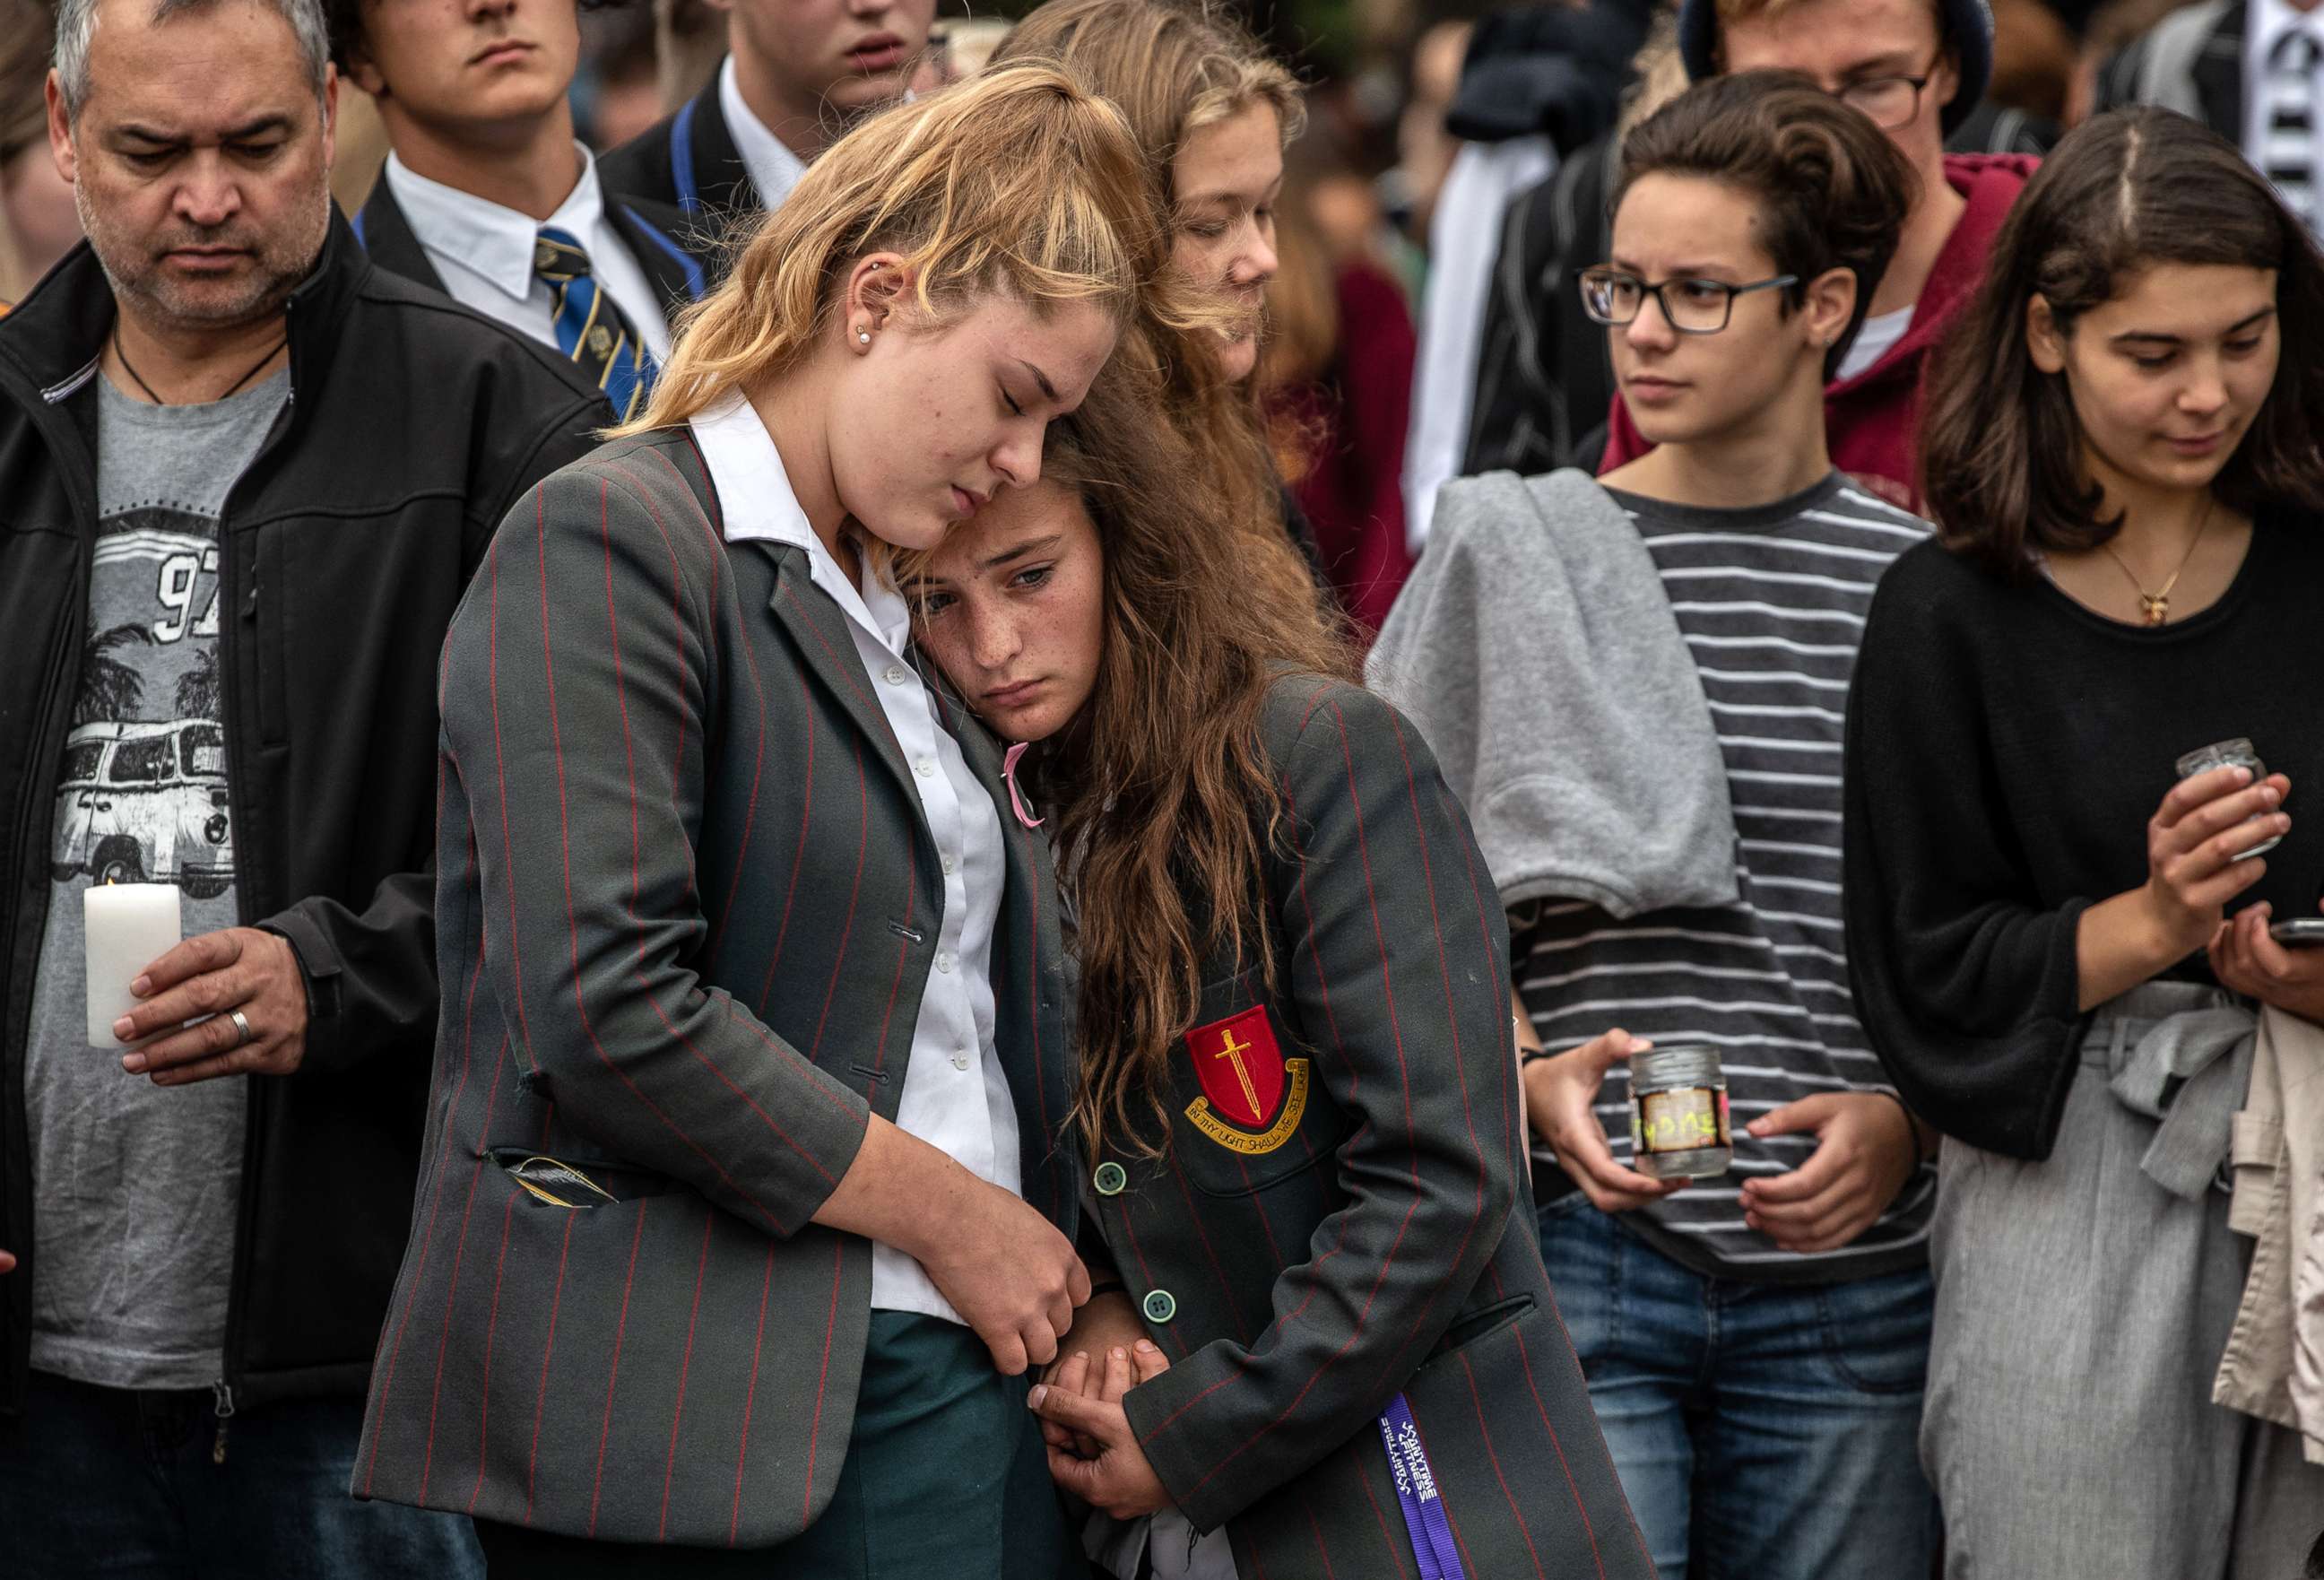 PHOTO: Schoolgirls comfort each other as they view flowers and tributes near Al Noor mosque, March 18, 2019 in Christchurch, New Zealand.